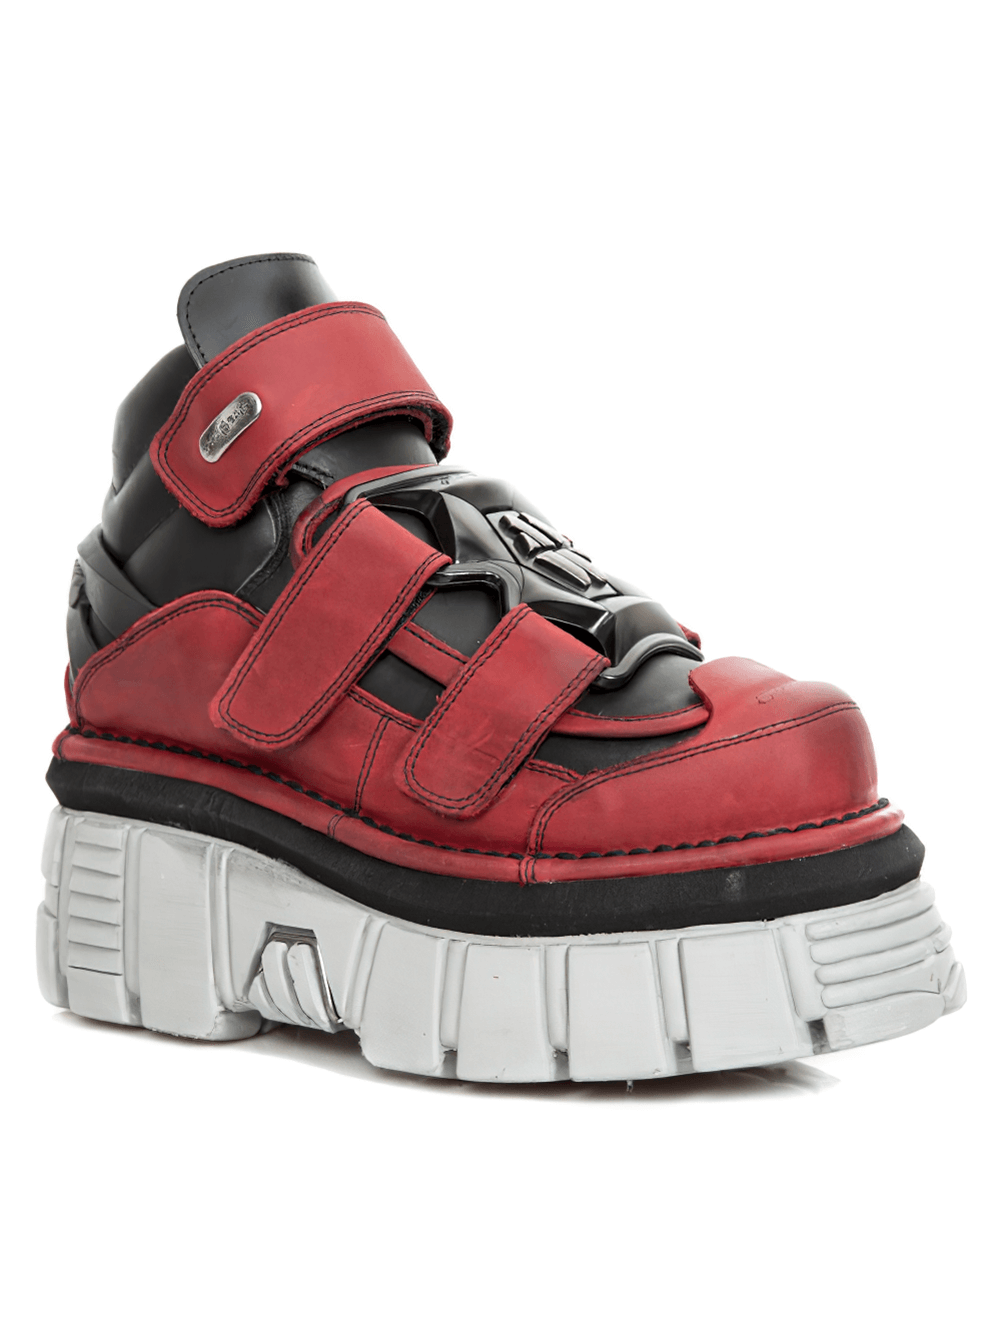 NEW ROCK Red and Black Platform Ankle Boots with Velcros